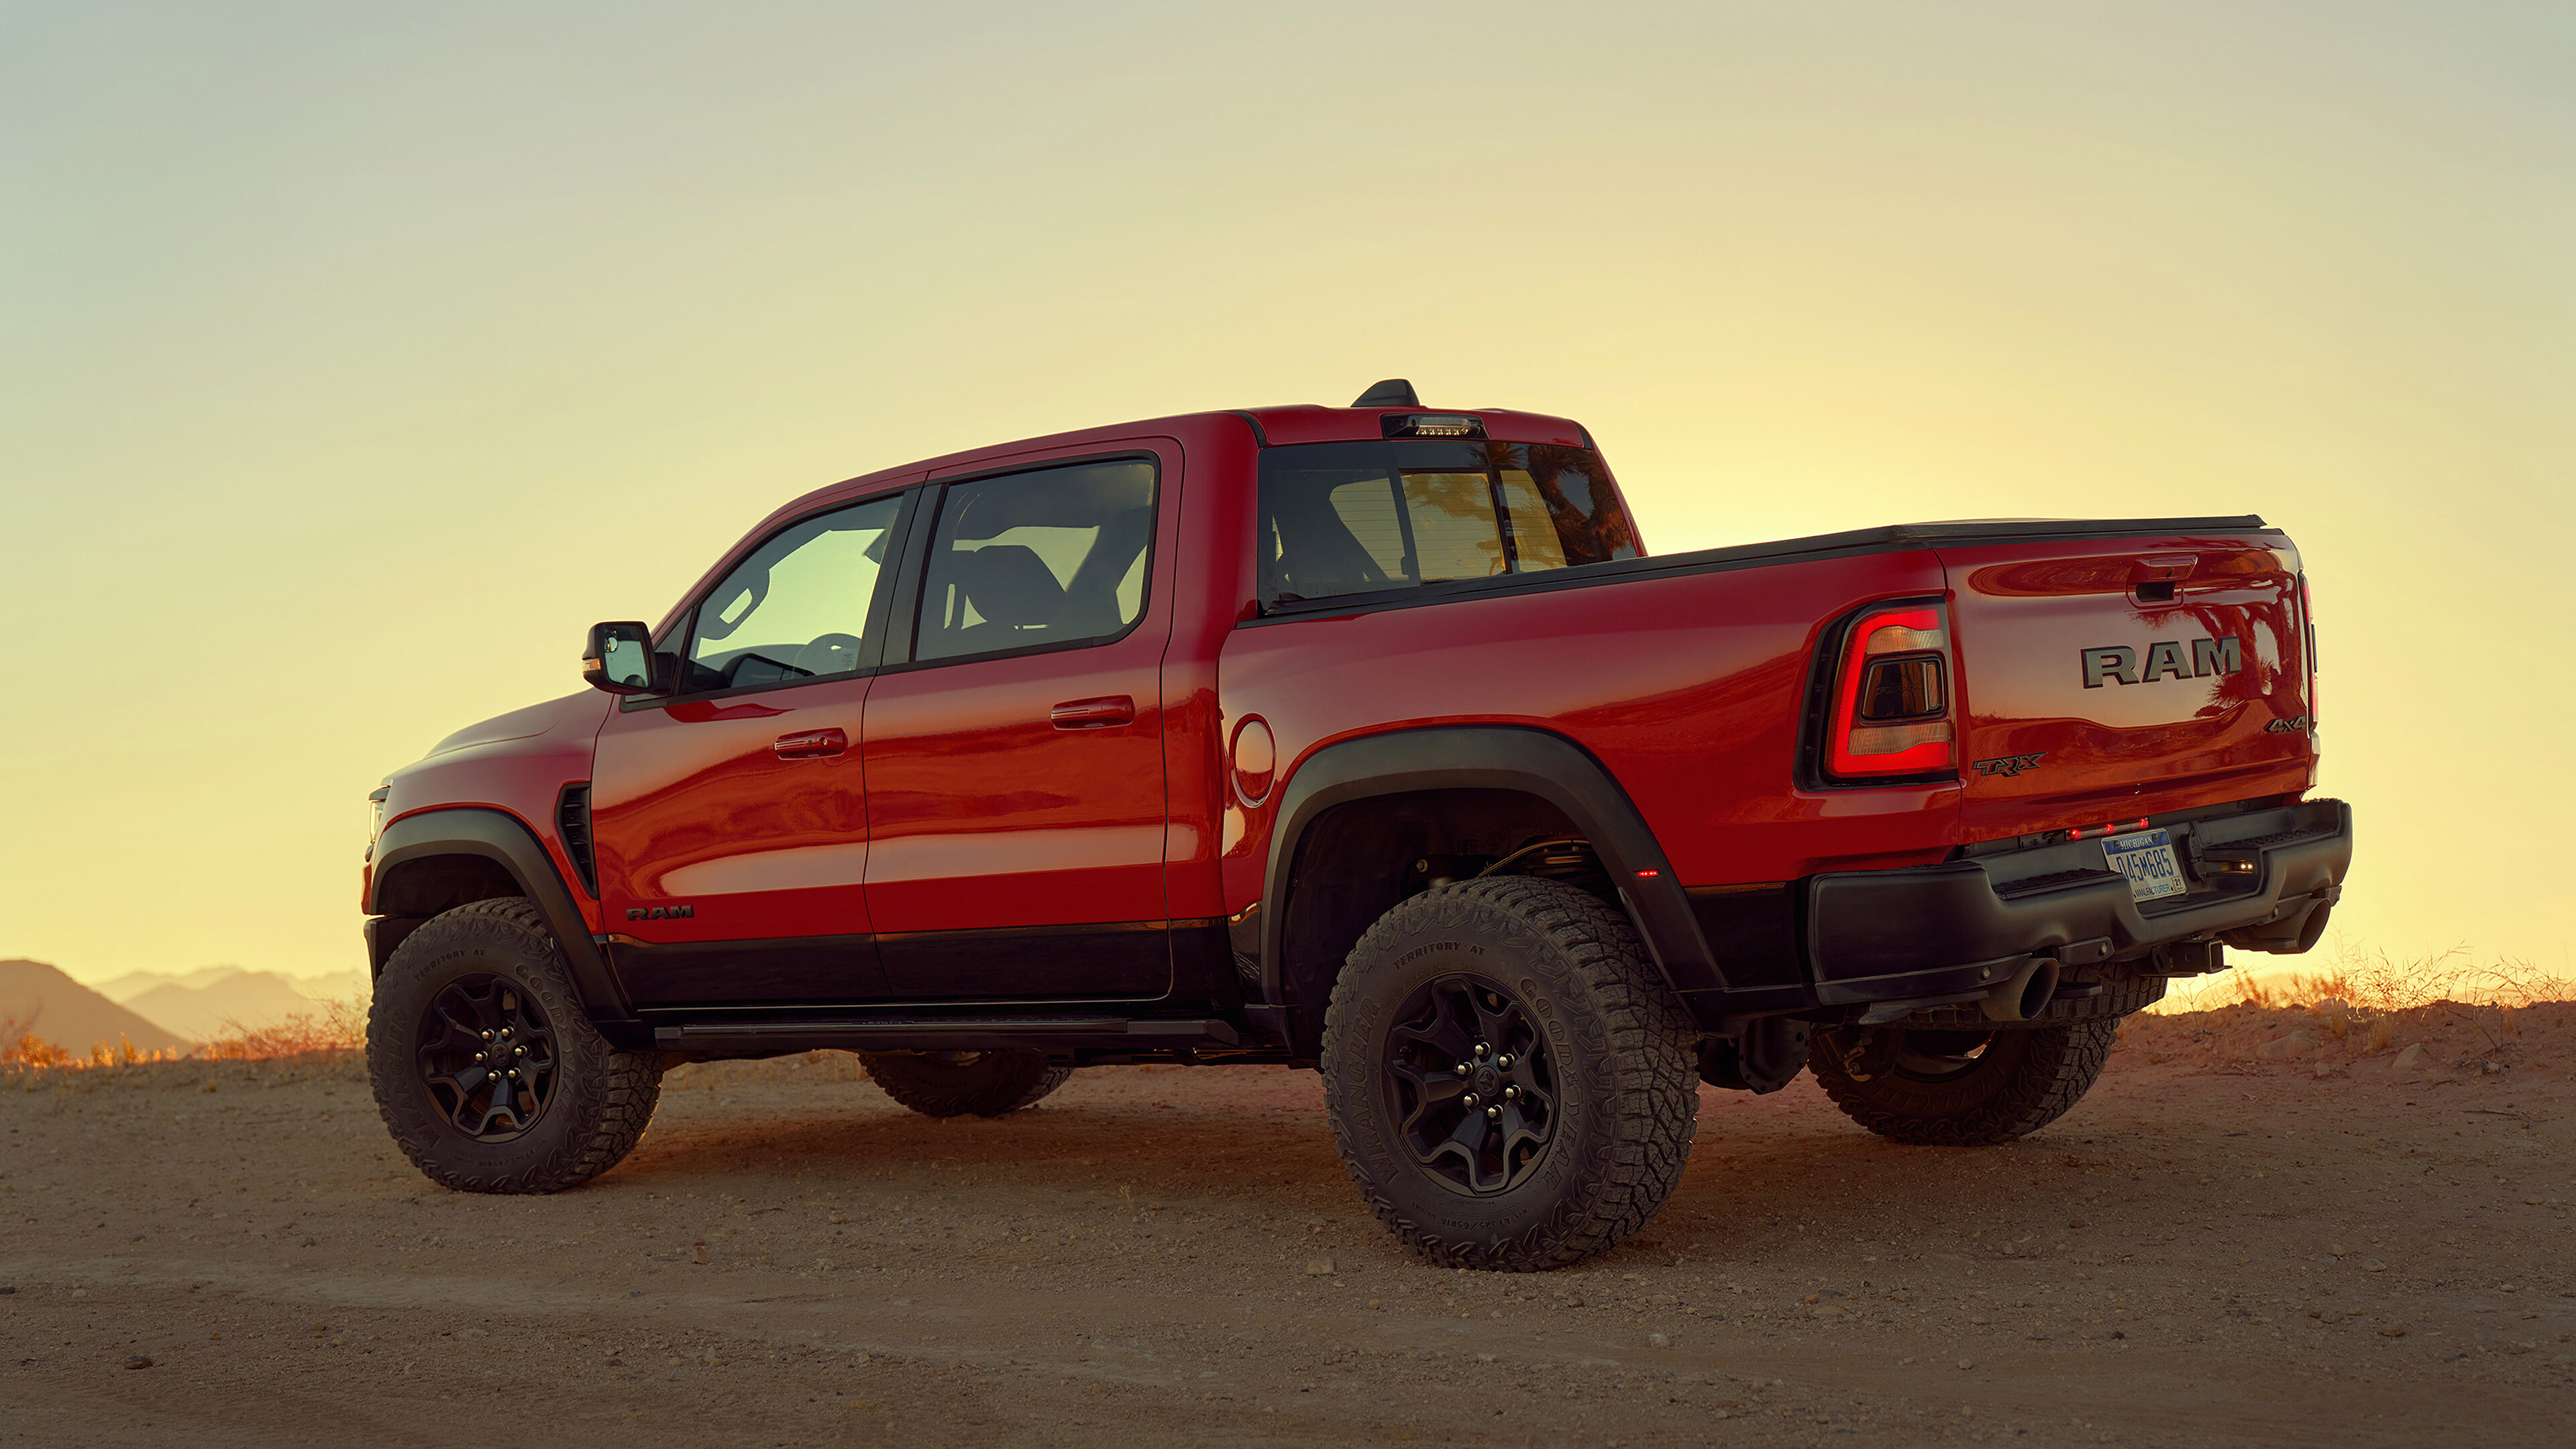 Ram Pickup: 2021 model 1500 TRX, The second-generation won the Truck of the Year award in 1994. 3840x2160 4K Wallpaper.